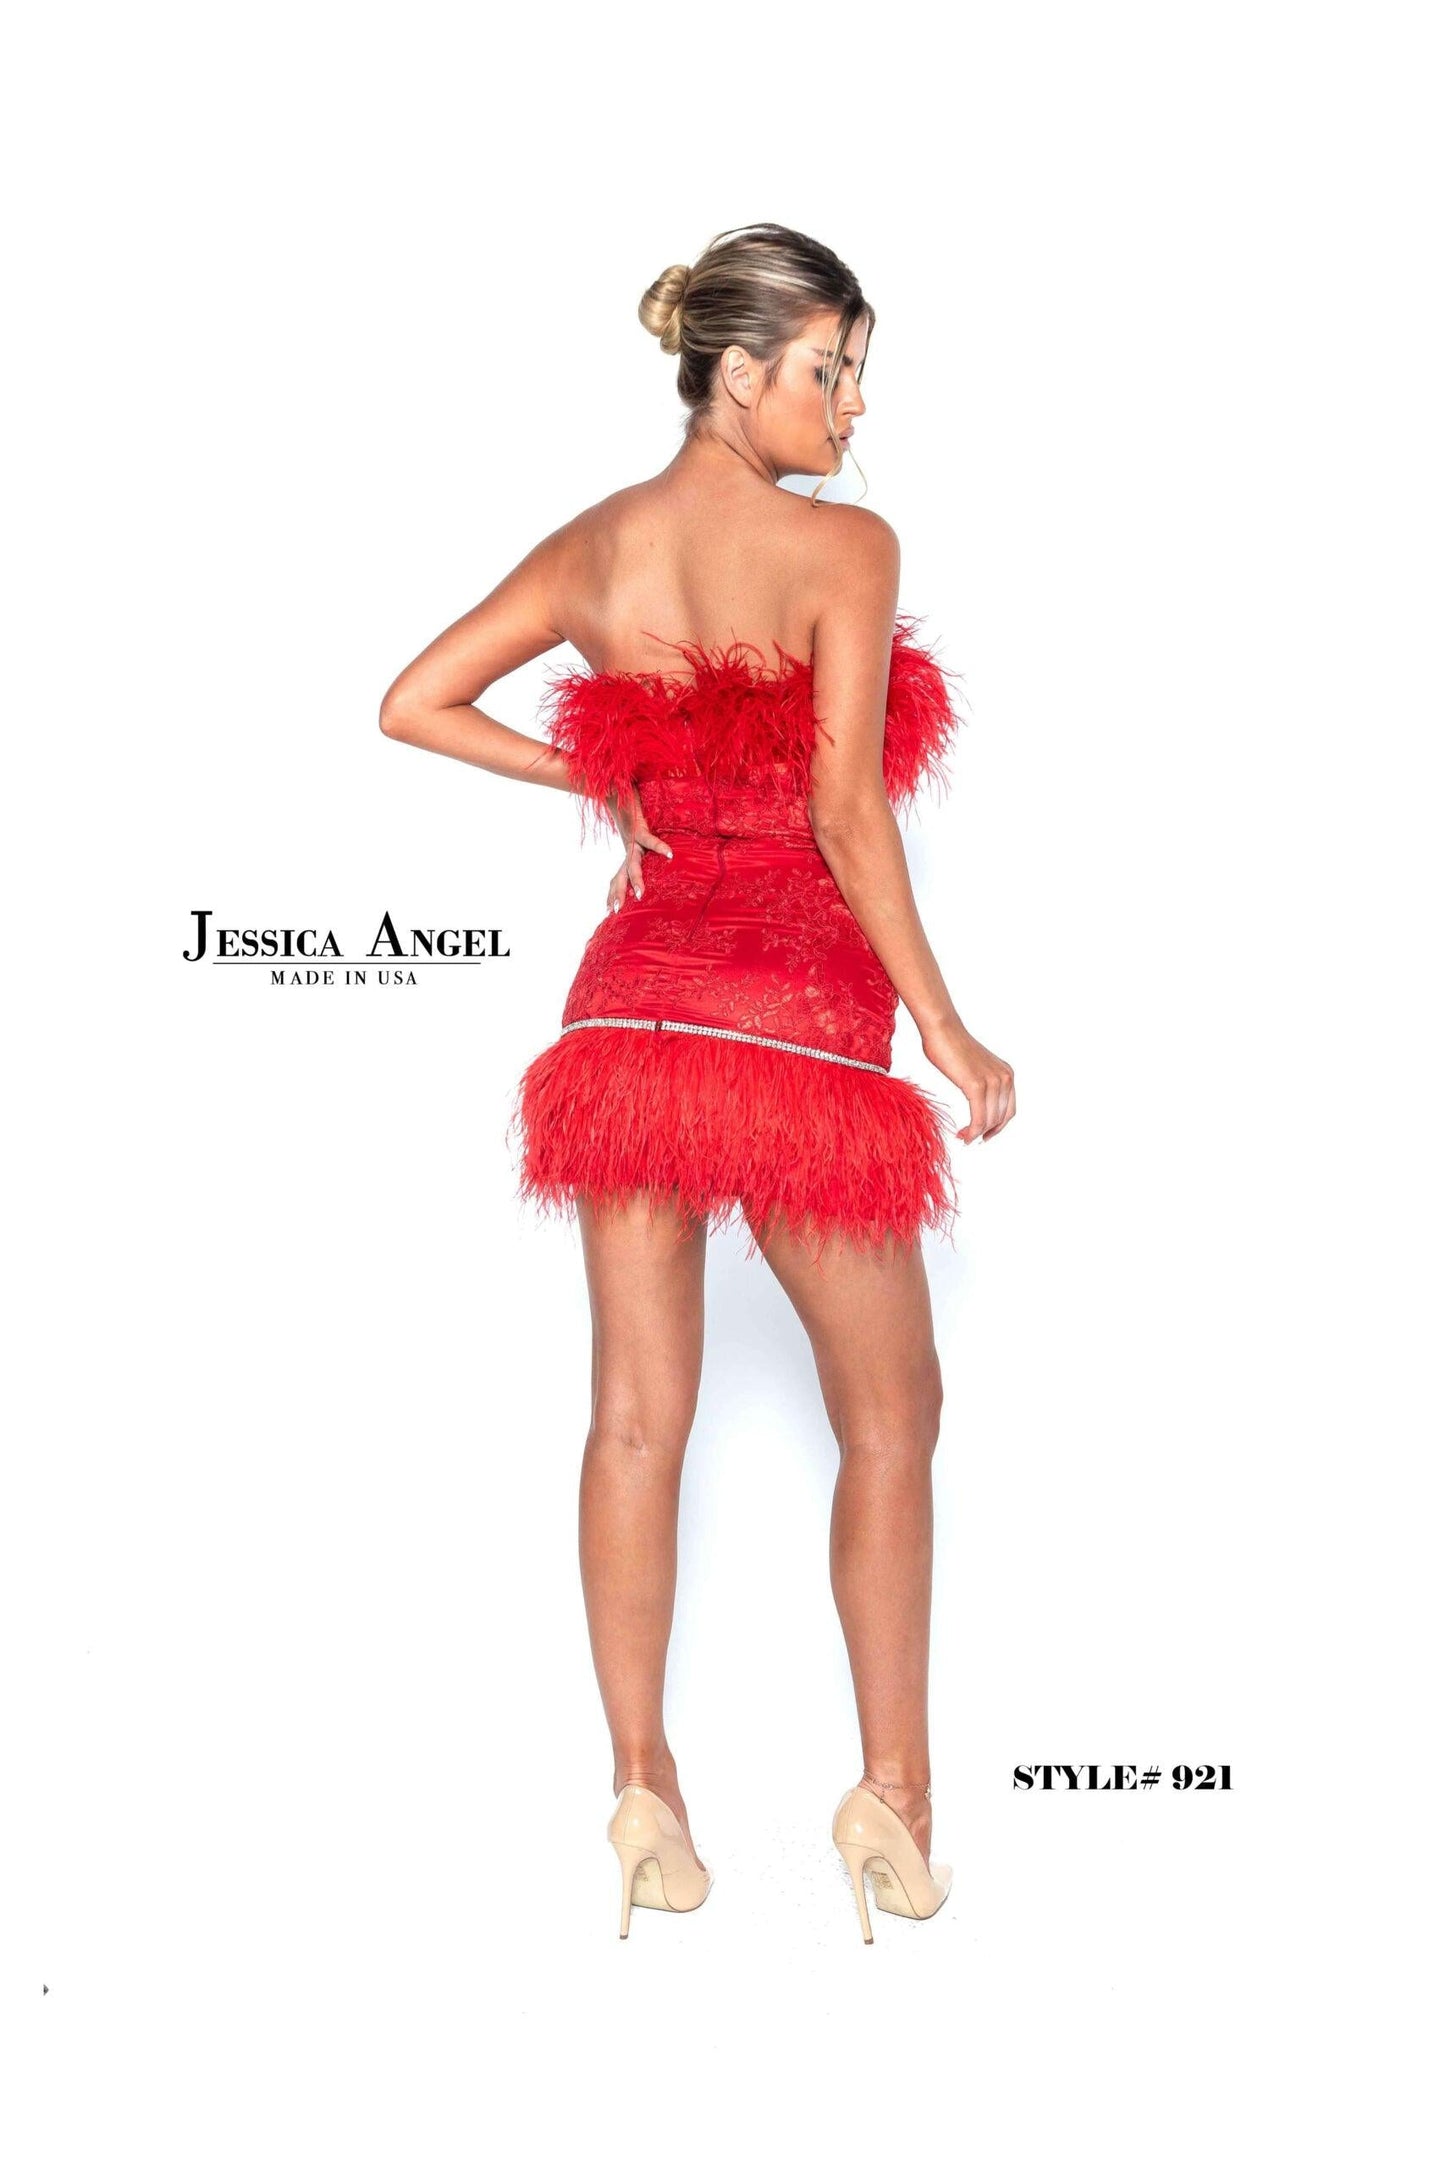 Jessica Angel Short Strapless Cocktail Dress 921 - The Dress Outlet